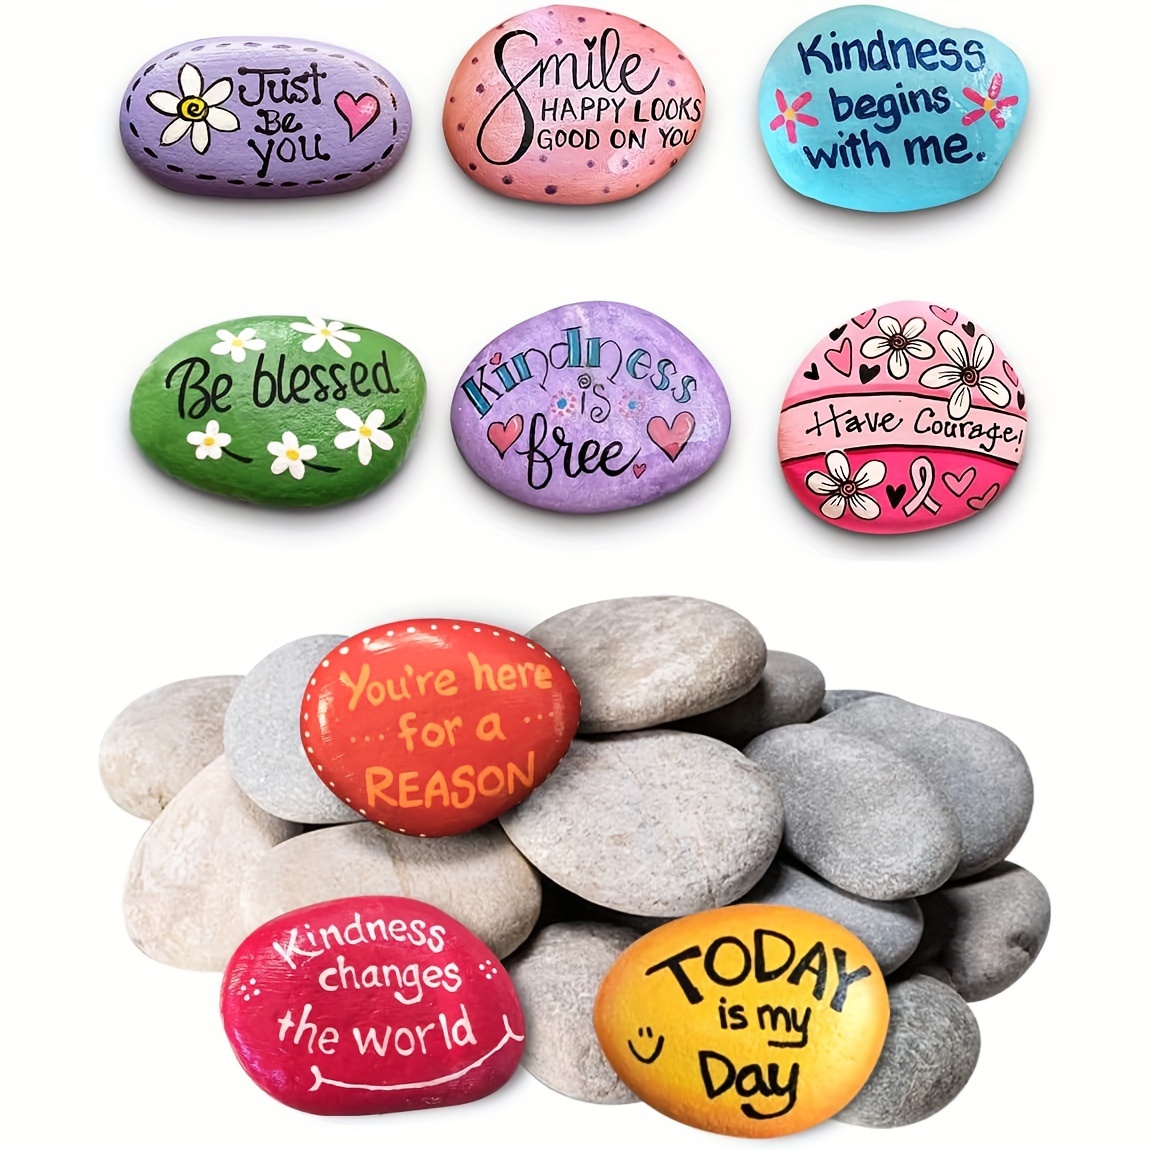 River Rocks for Painting 10-50Pcs Large 2-3 Inch Flat Smooth Painting Stones  Craft Rock